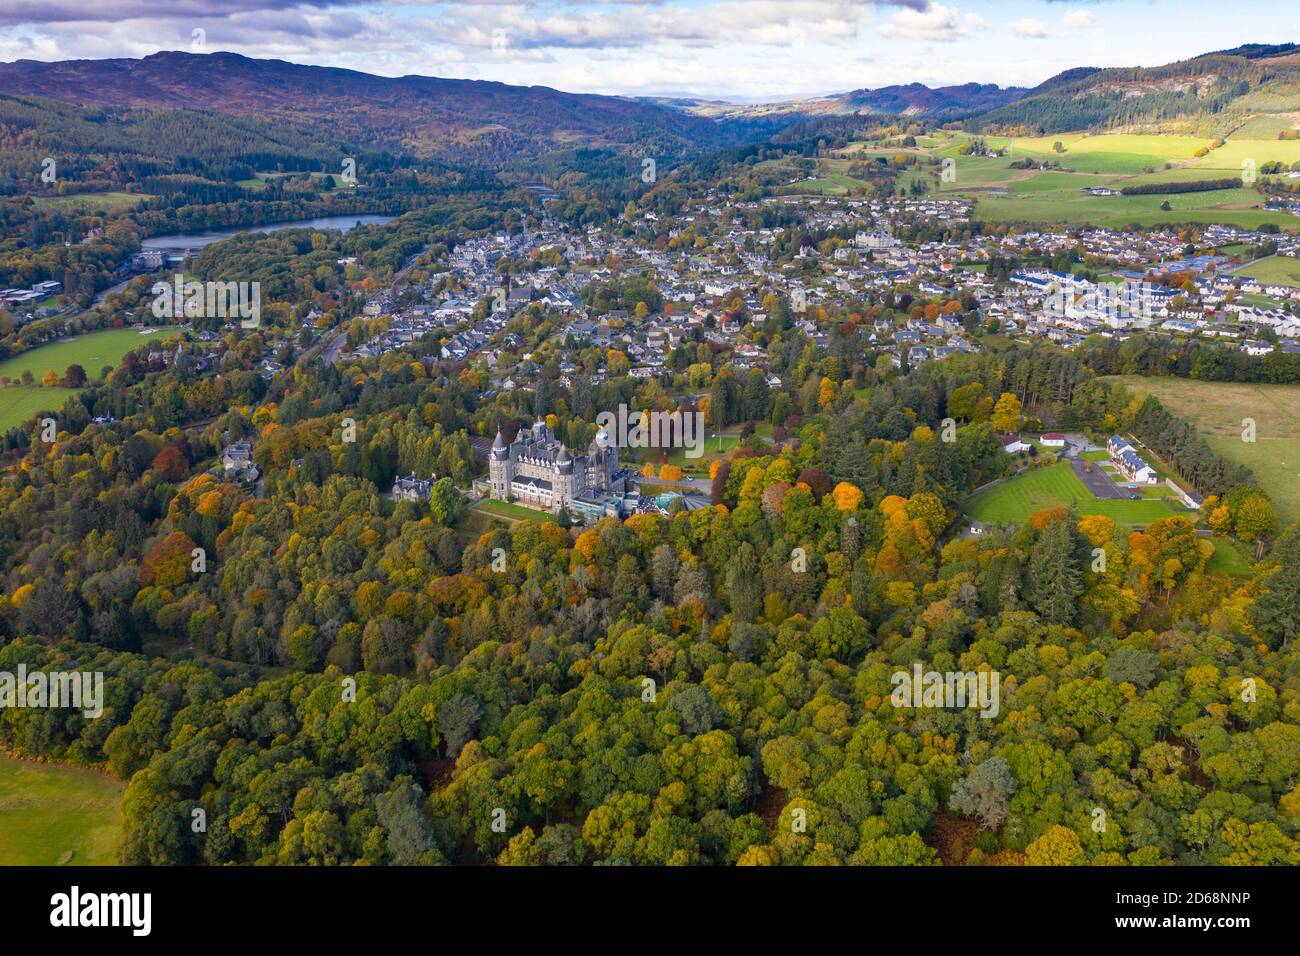 Aerial view during autumn of Atholl Palace Museum and town of Pitlochry in Perthshire, Scotland, UK Stock Photo